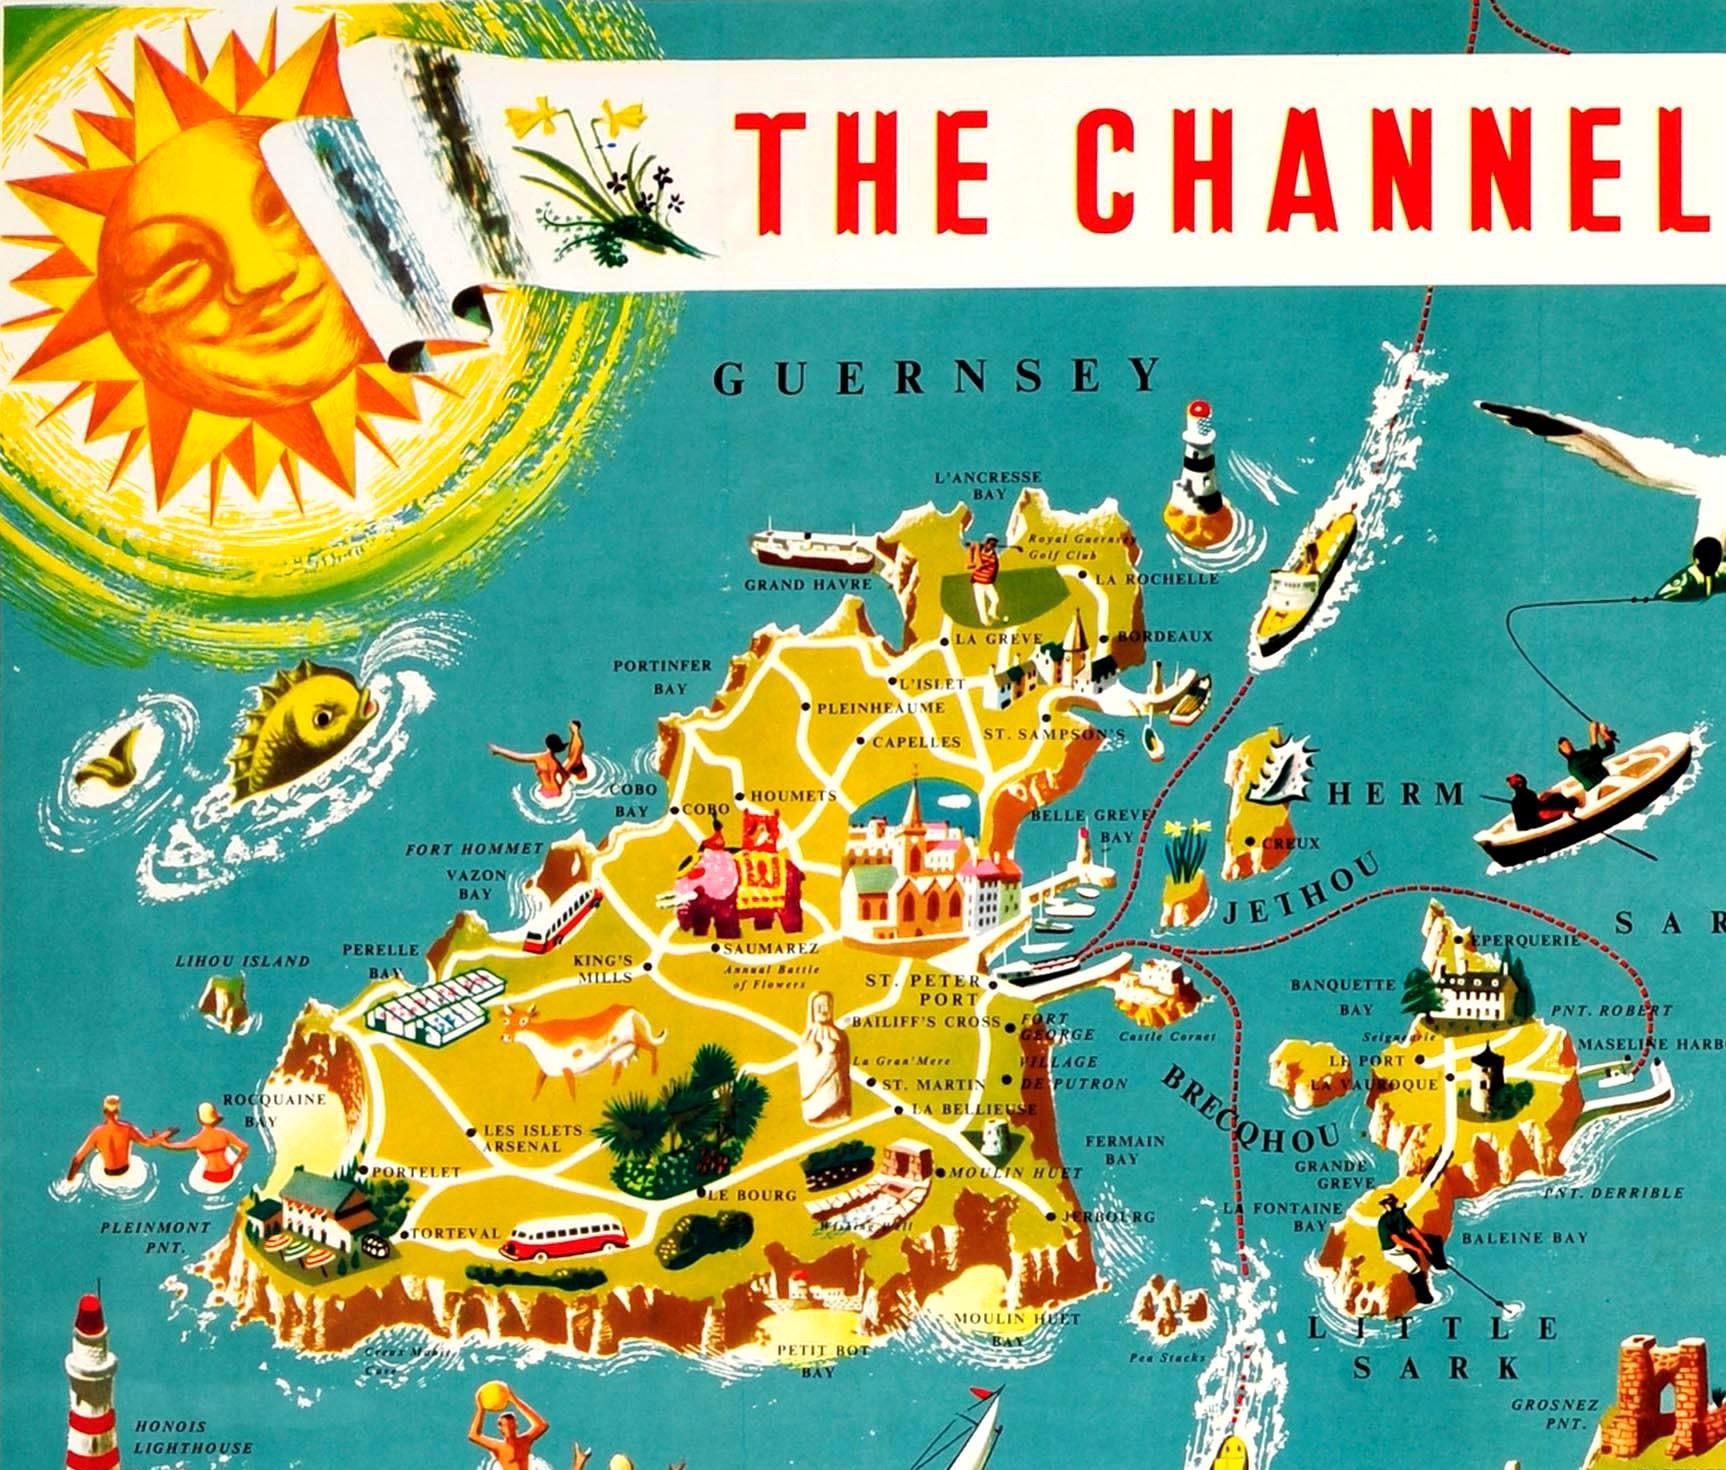 Original Vintage British Railways Poster Illustrated Map Of The Channel Islands - Print by Frederick Griffin